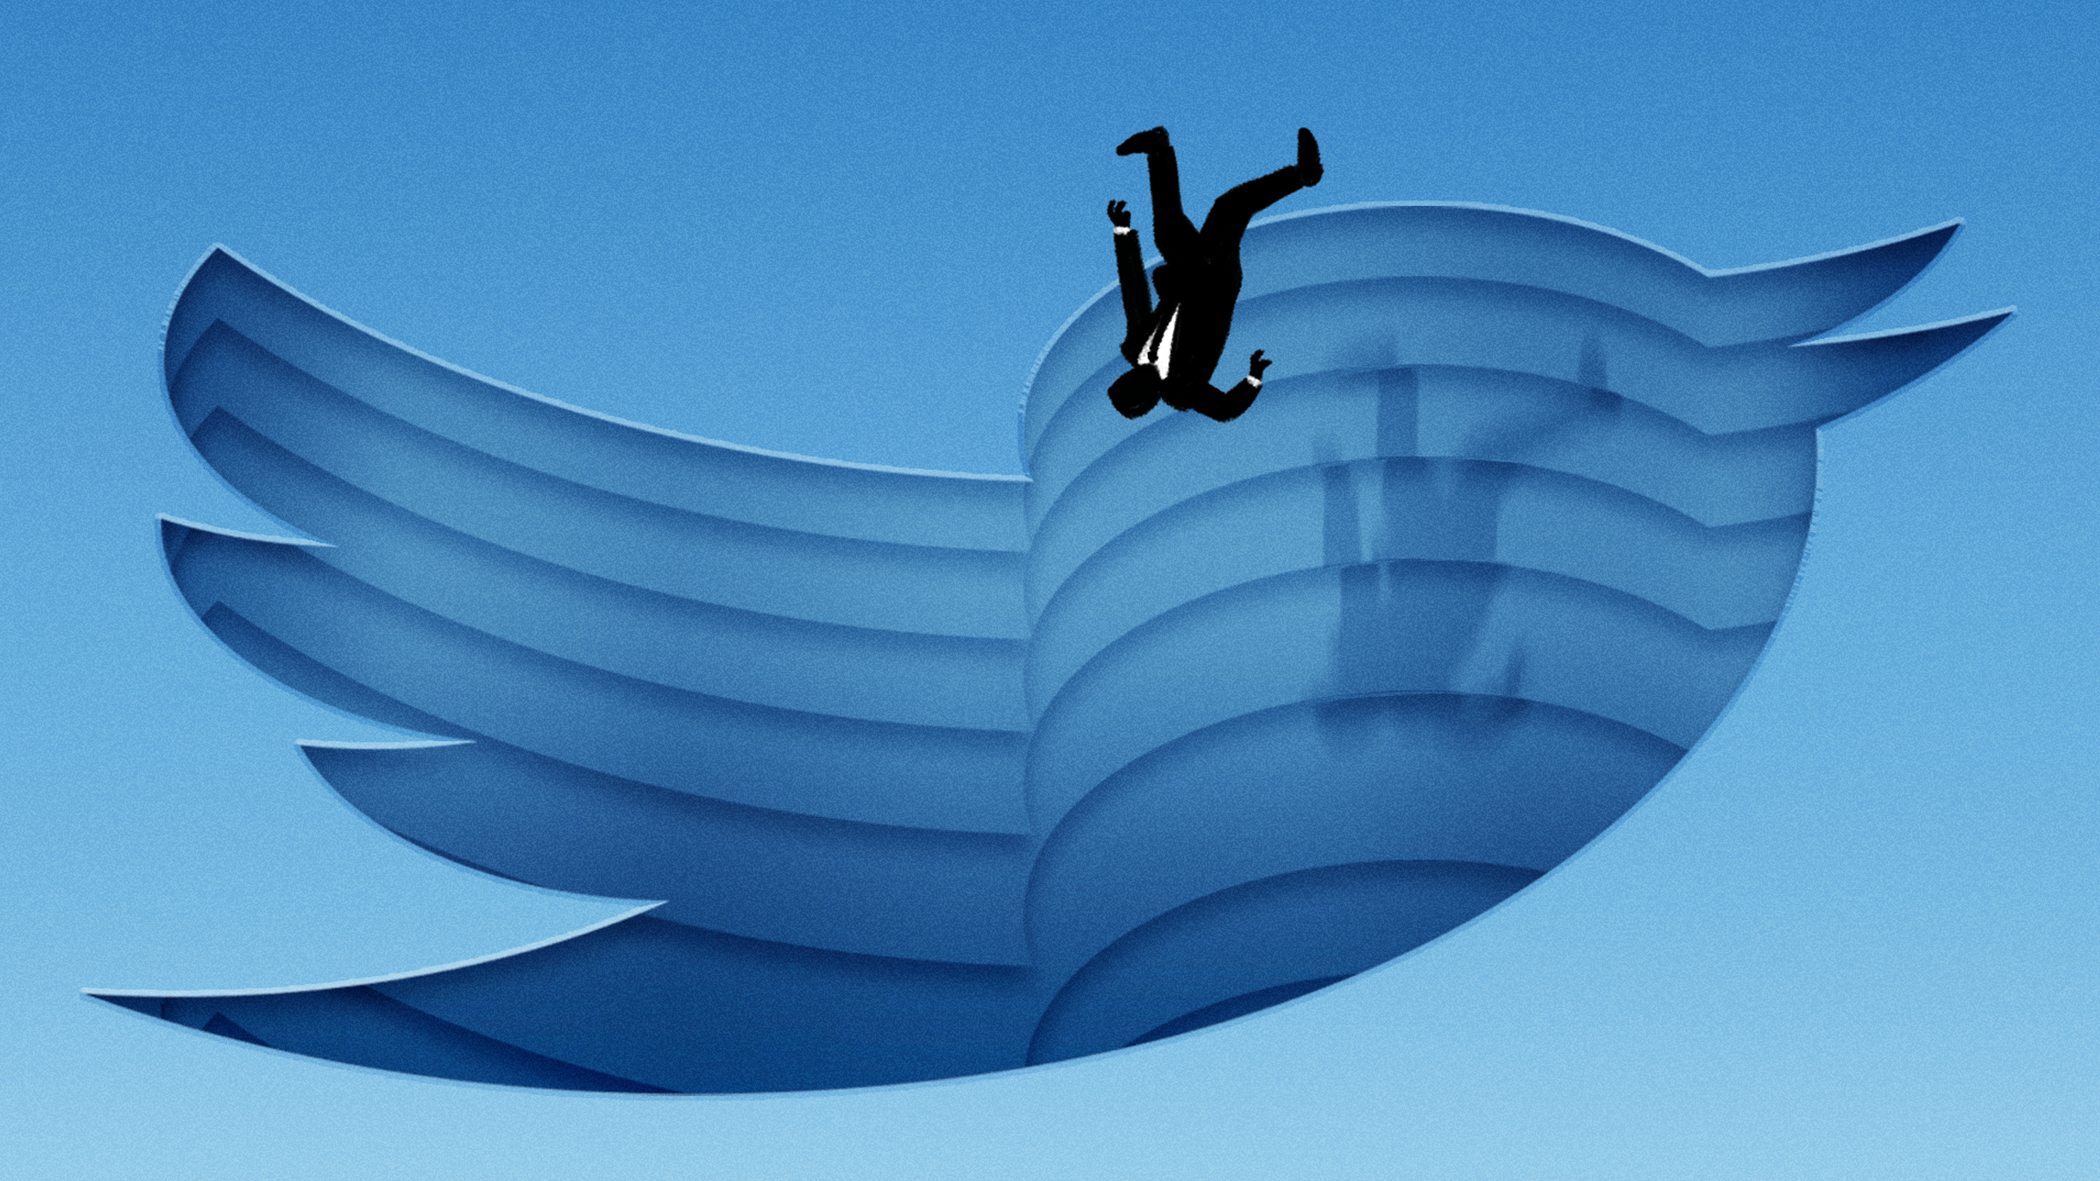 A cartoon man in a suit and tie falls through a blue background. Behind him is a large Twitter logo.